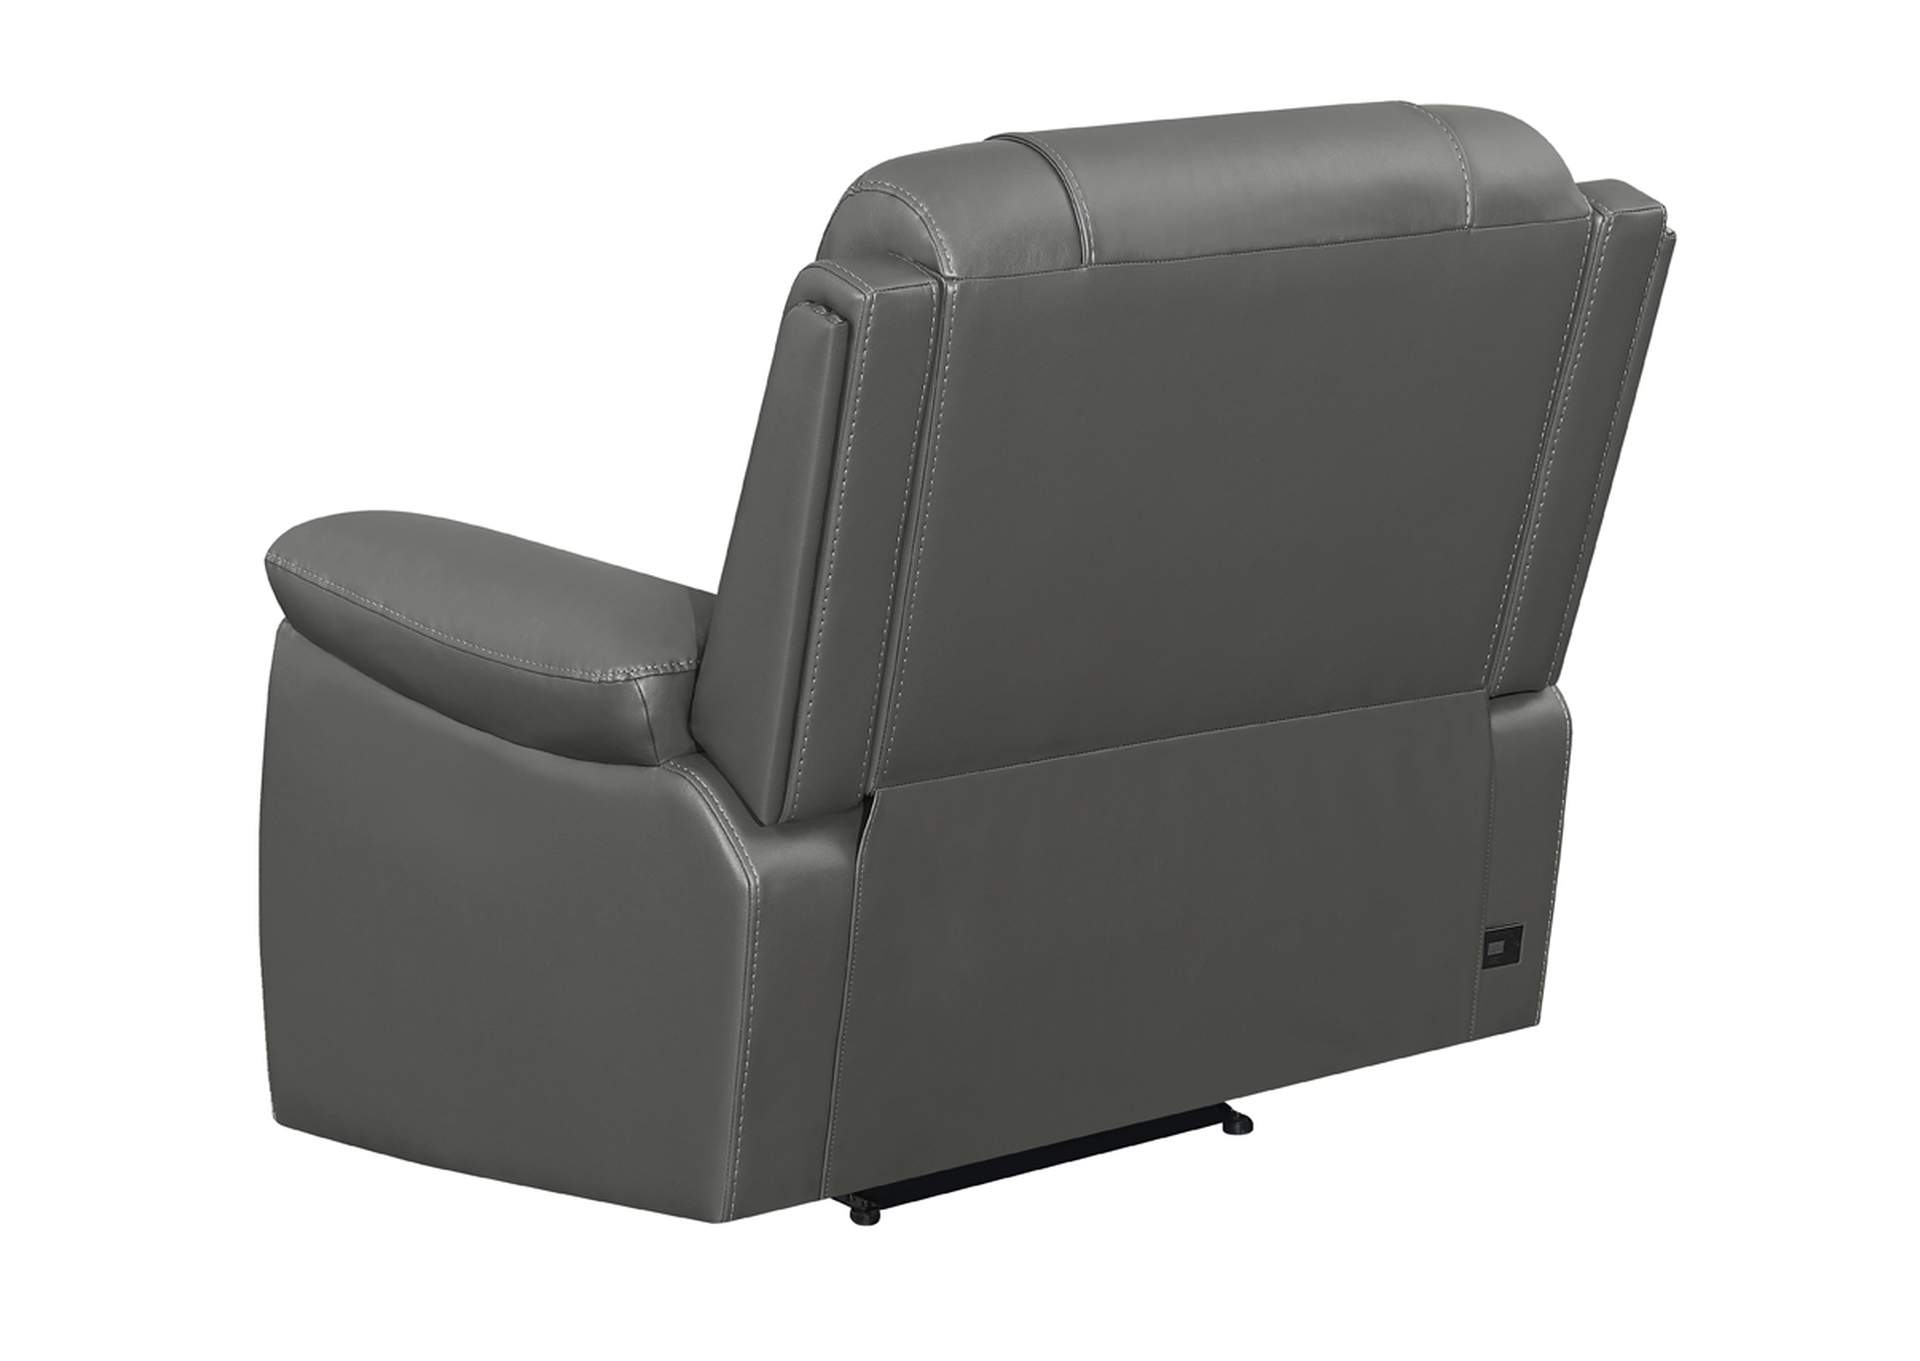 Flamenco Tufted Upholstered Power Recliner Charcoal,Coaster Furniture